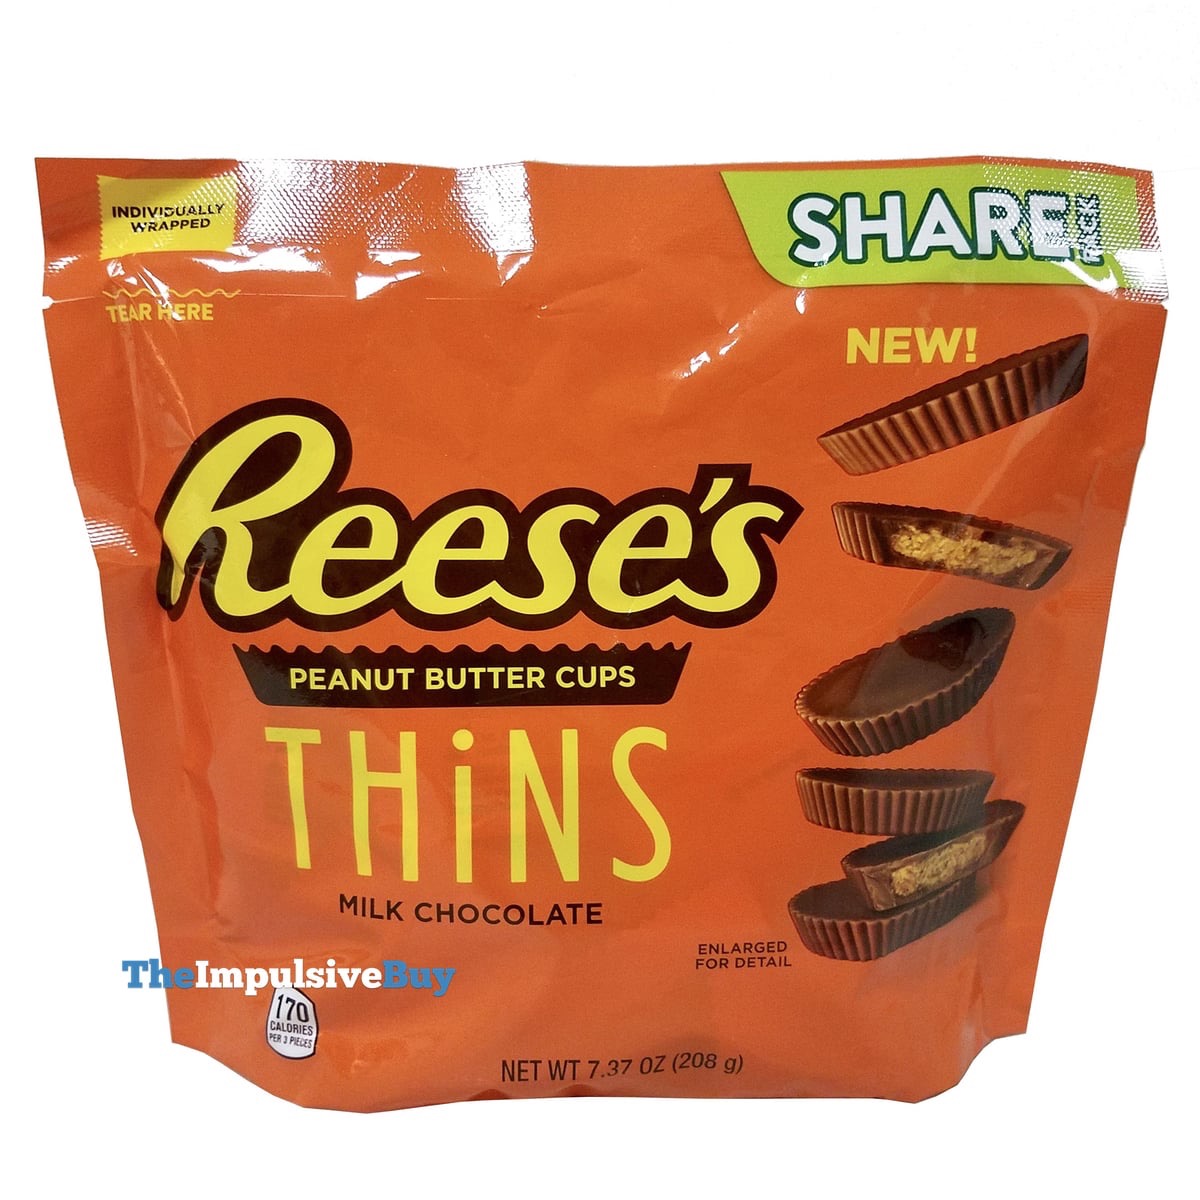 REVIEW: Reese's Thins Peanut Butter Cups - The Impulsive Buy